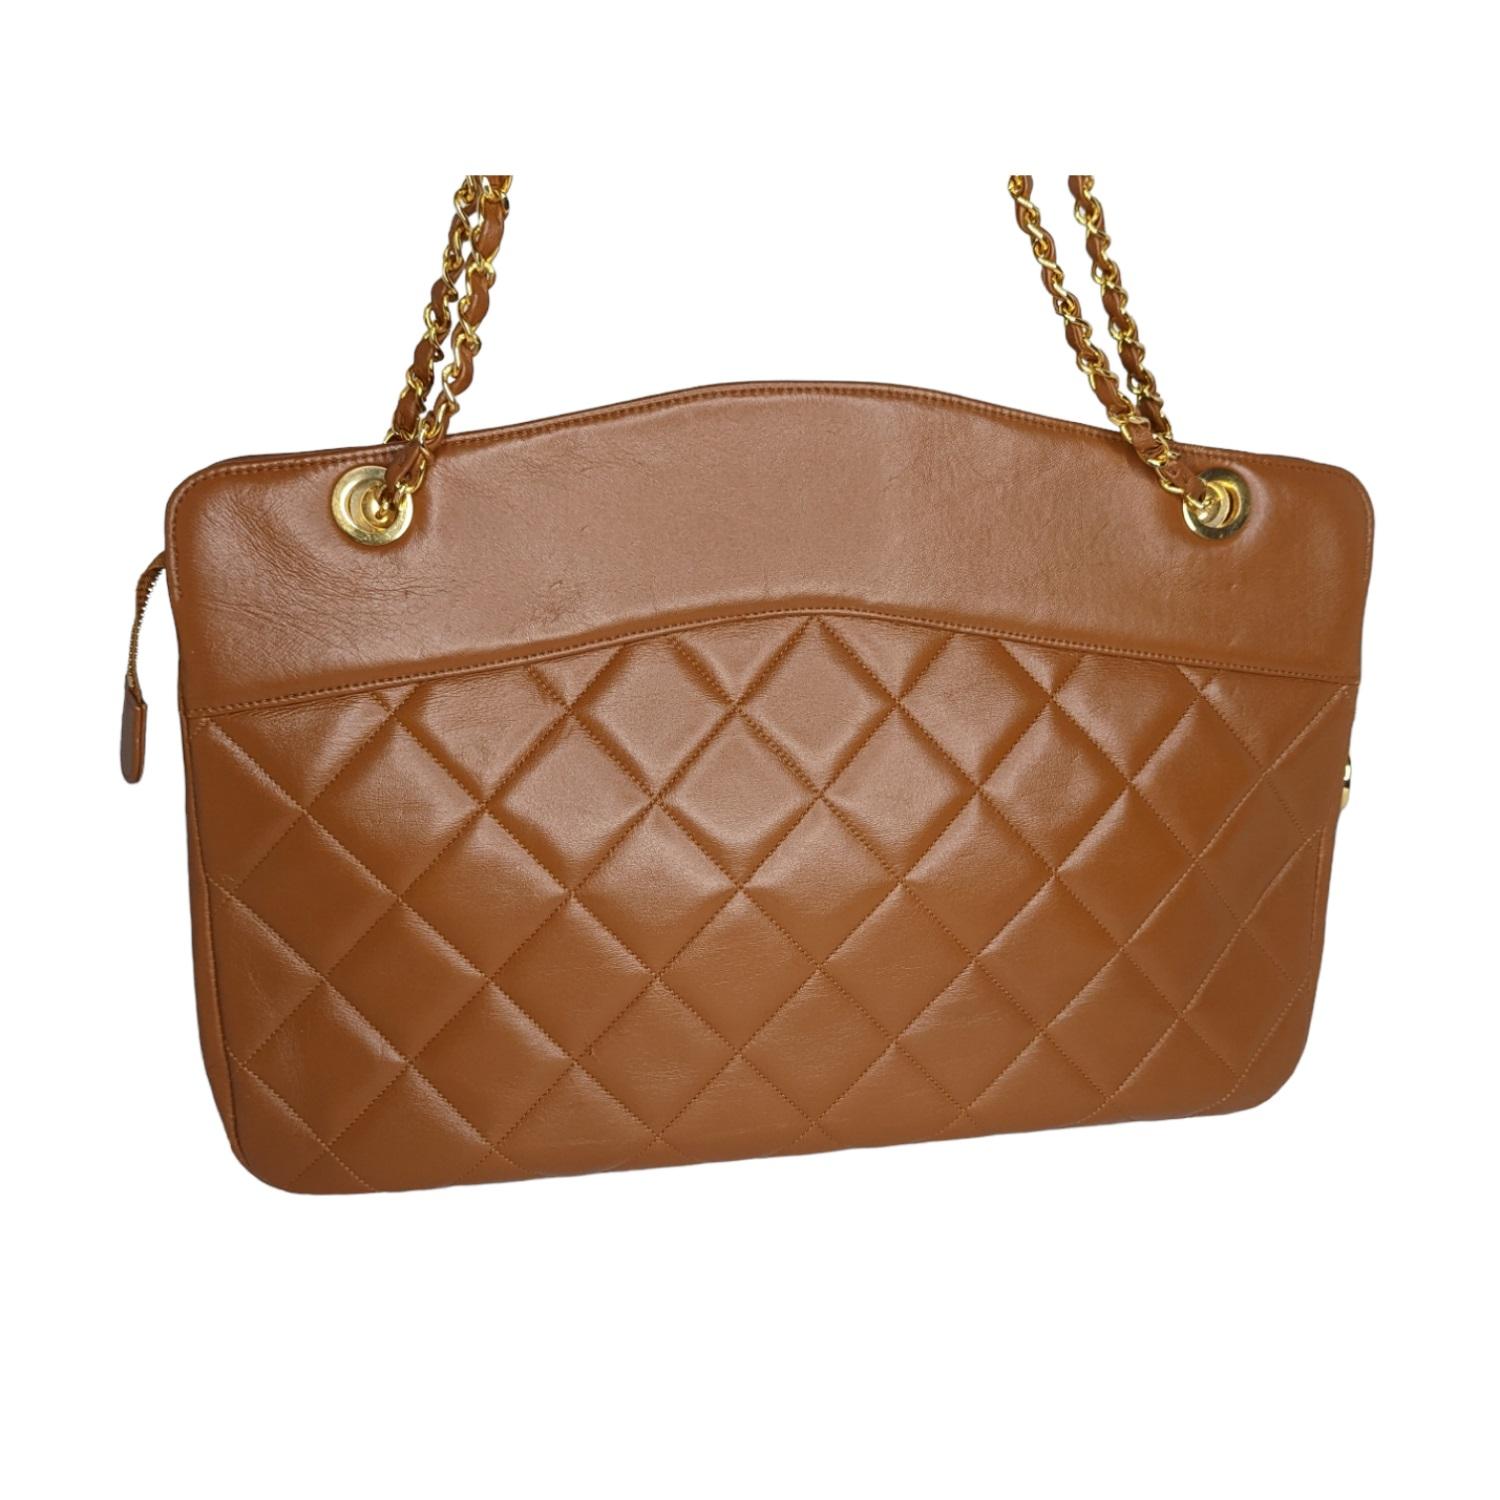 Chanel Vintage Camel colored diamond Lambskin leather tote with gold-tone hardware, leather woven chain shoulder straps, spacious interior lined in leather with three pockets and a single zipper CC medallion pull. Comes with a matching 7.5